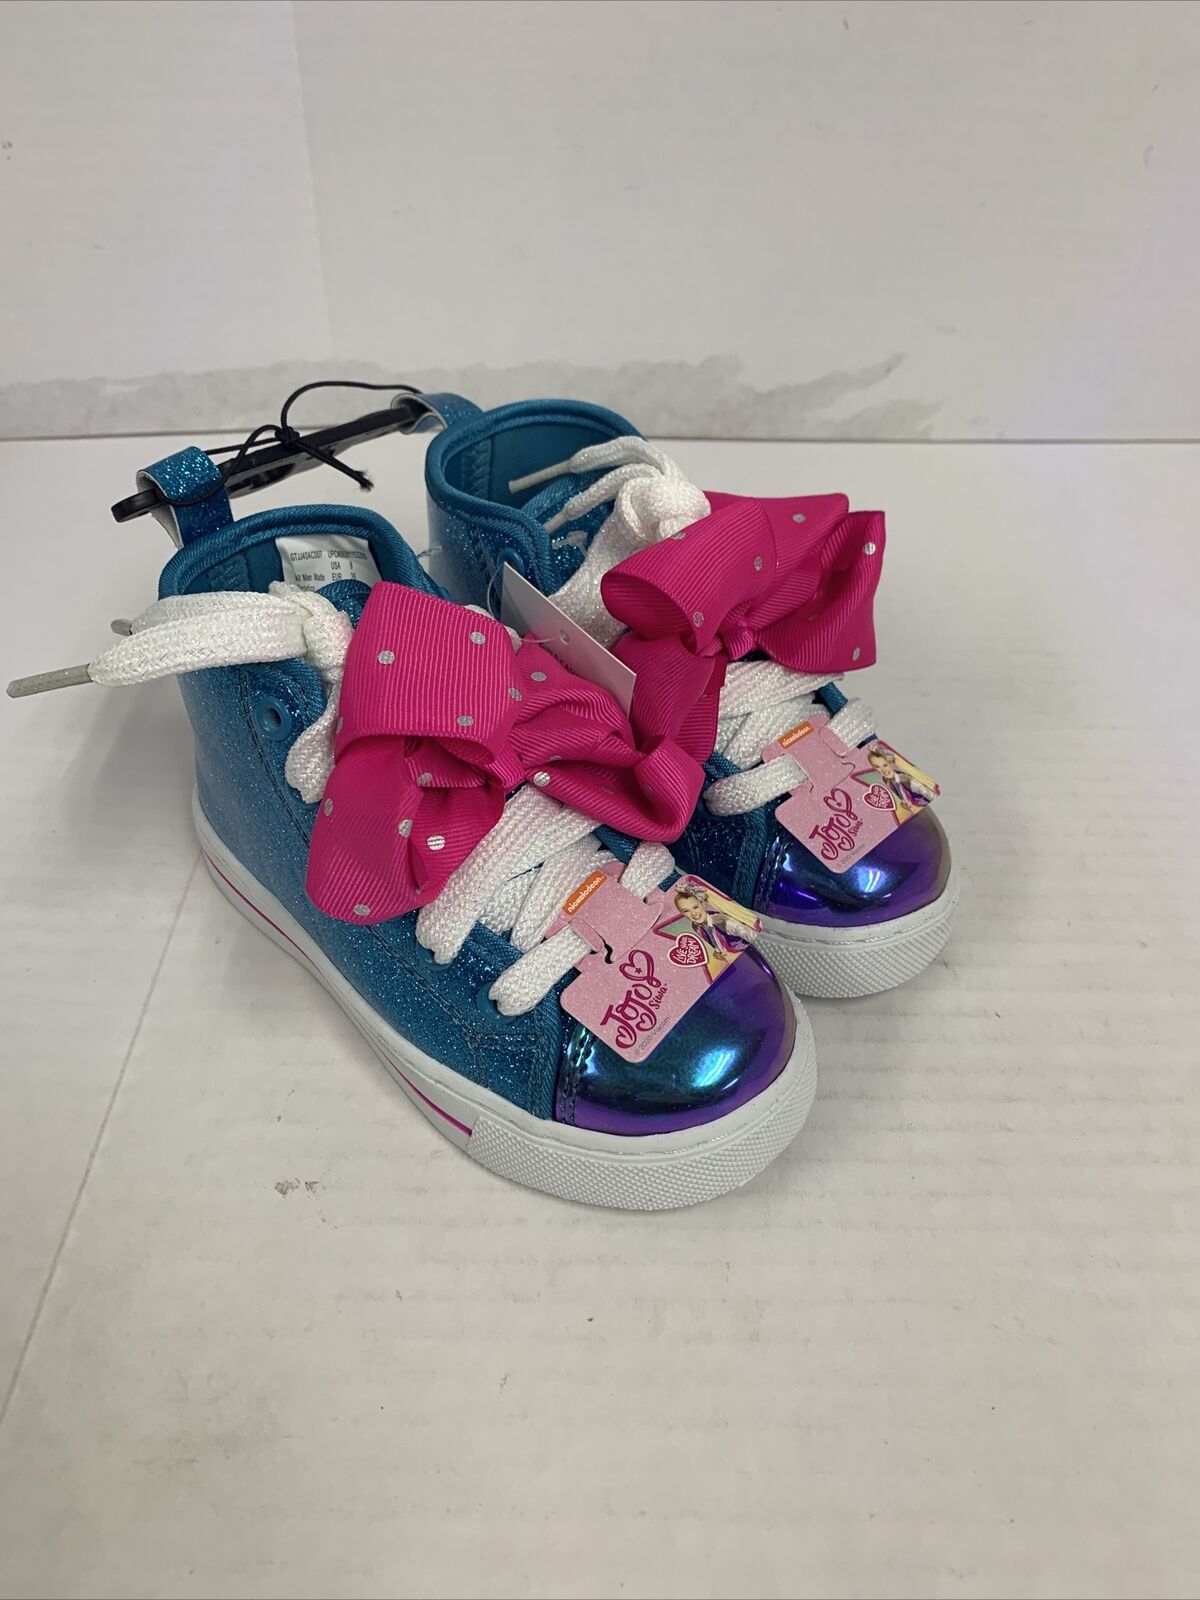 JoJo Siwa High Top Sneakers Shoes Size 9 Glitter Teal Blue w/ Pink Bow New